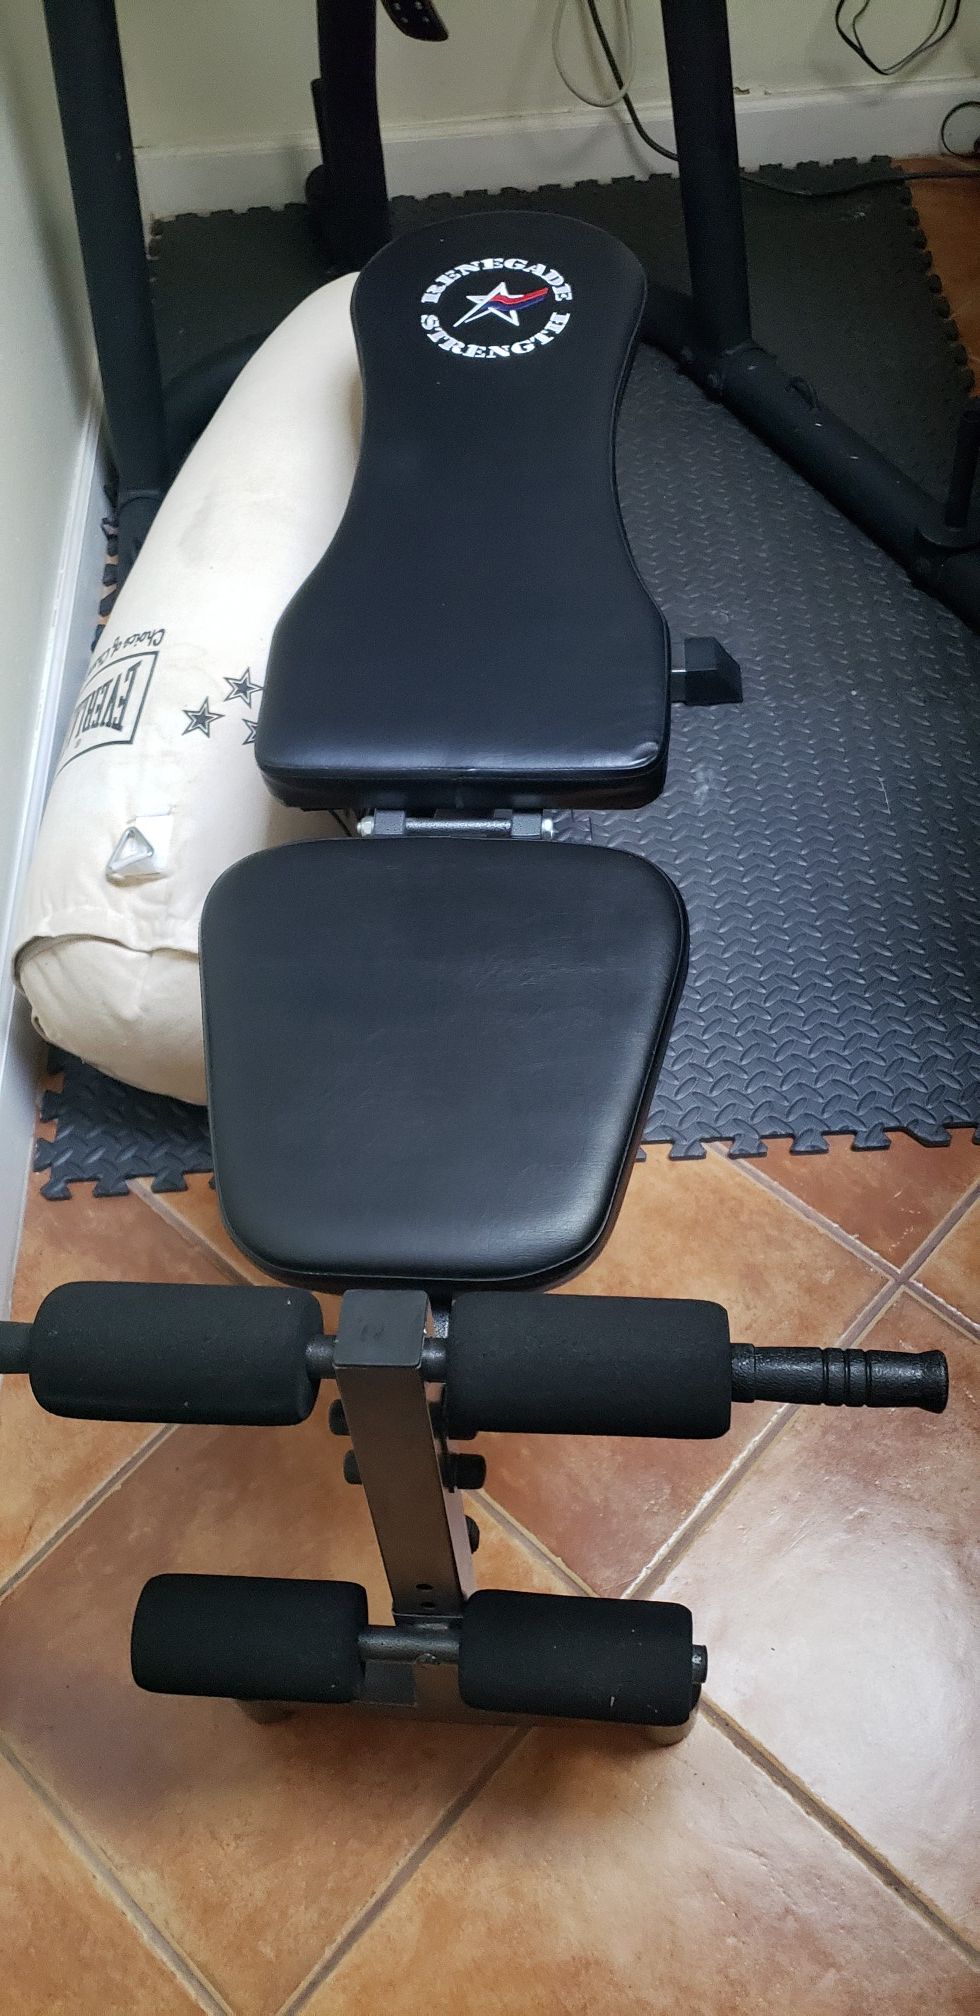 Workout Bench new.